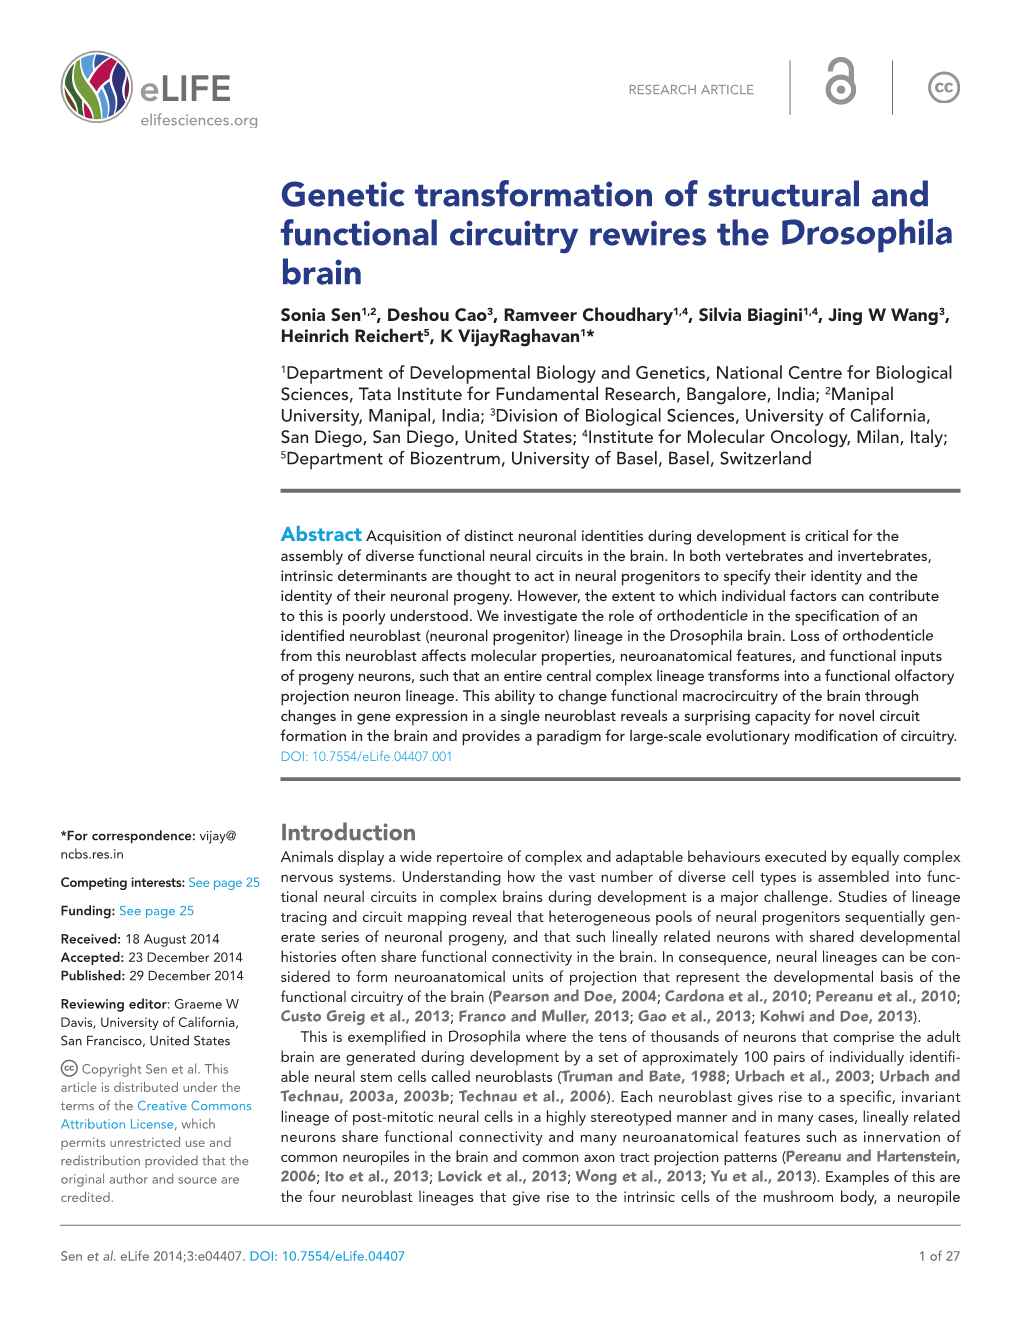 Genetic Transformation of Structural and Functional Circuitry Rewires The